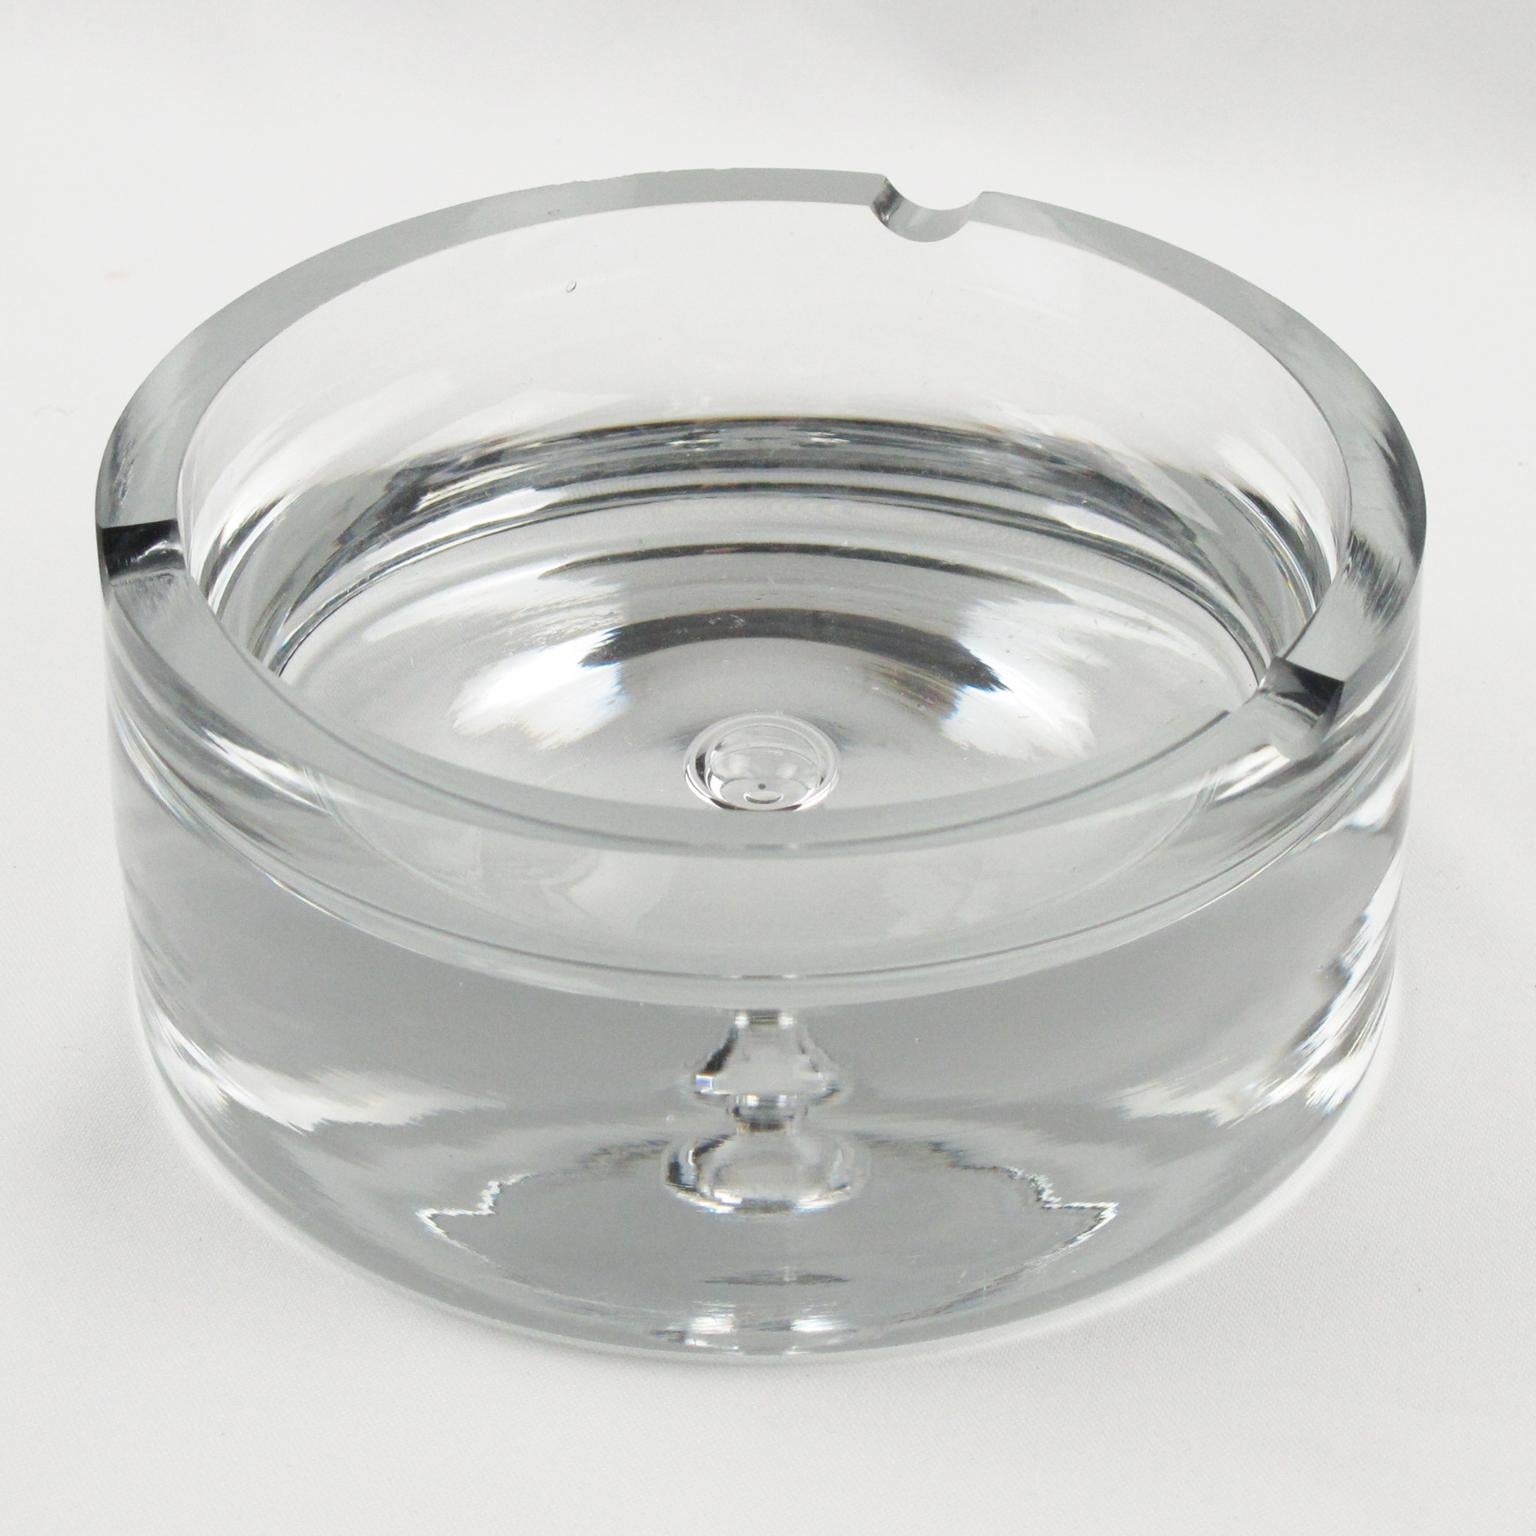 Mid-20th Century French Modernist Glass Cigar Ashtray Tidy Desk Accessory, 1950s